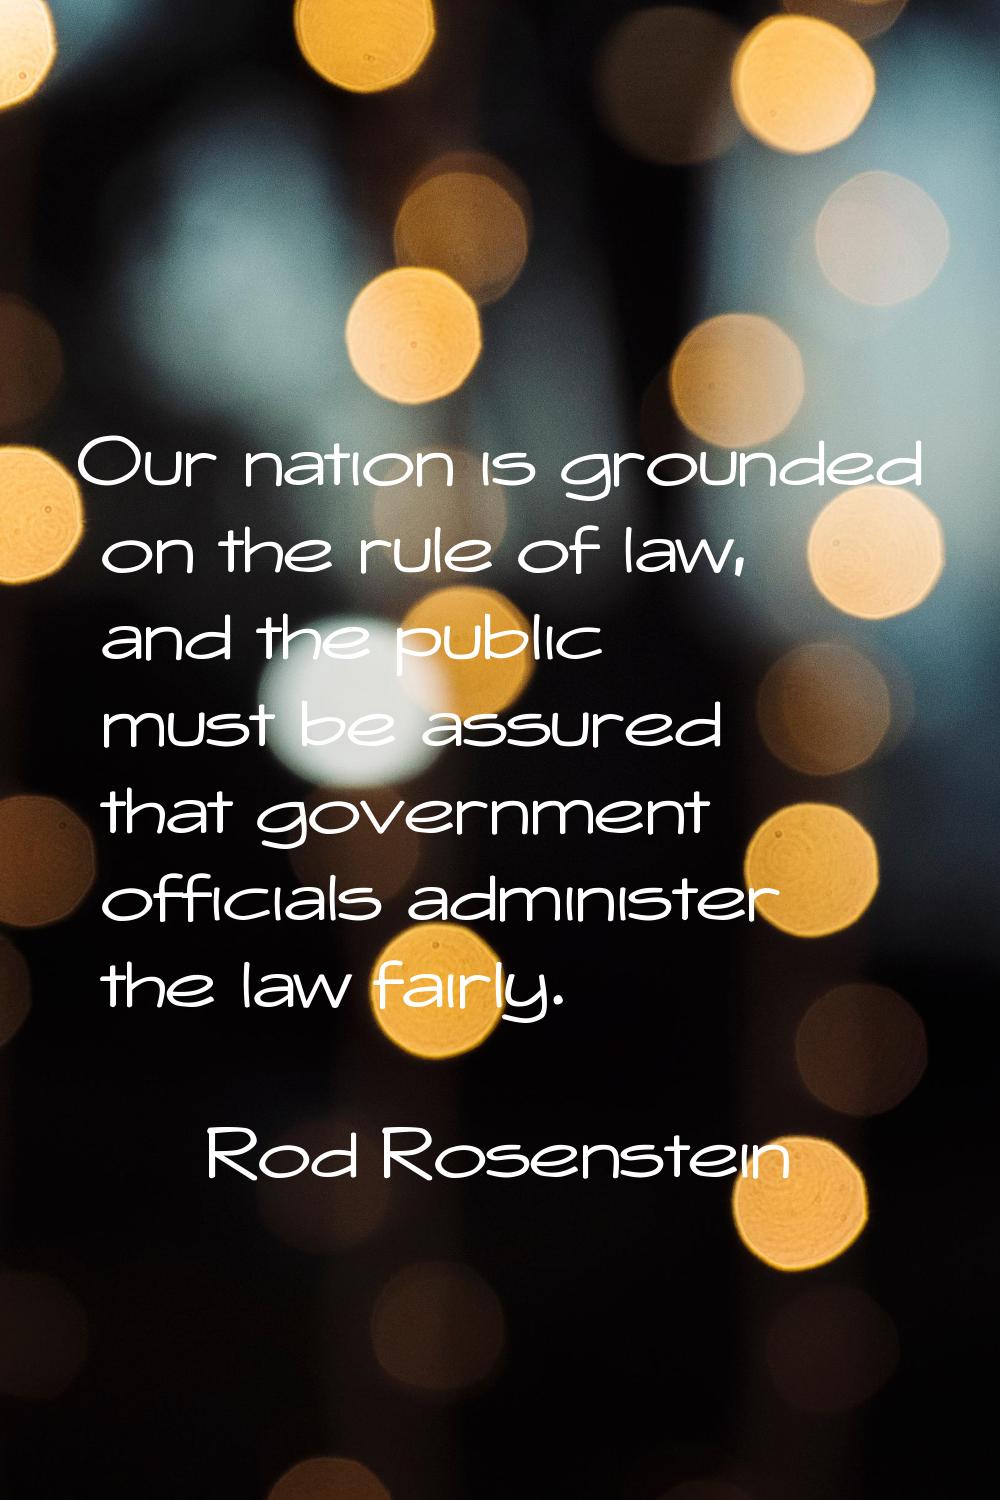 Our nation is grounded on the rule of law, and the public must be assured that government officials